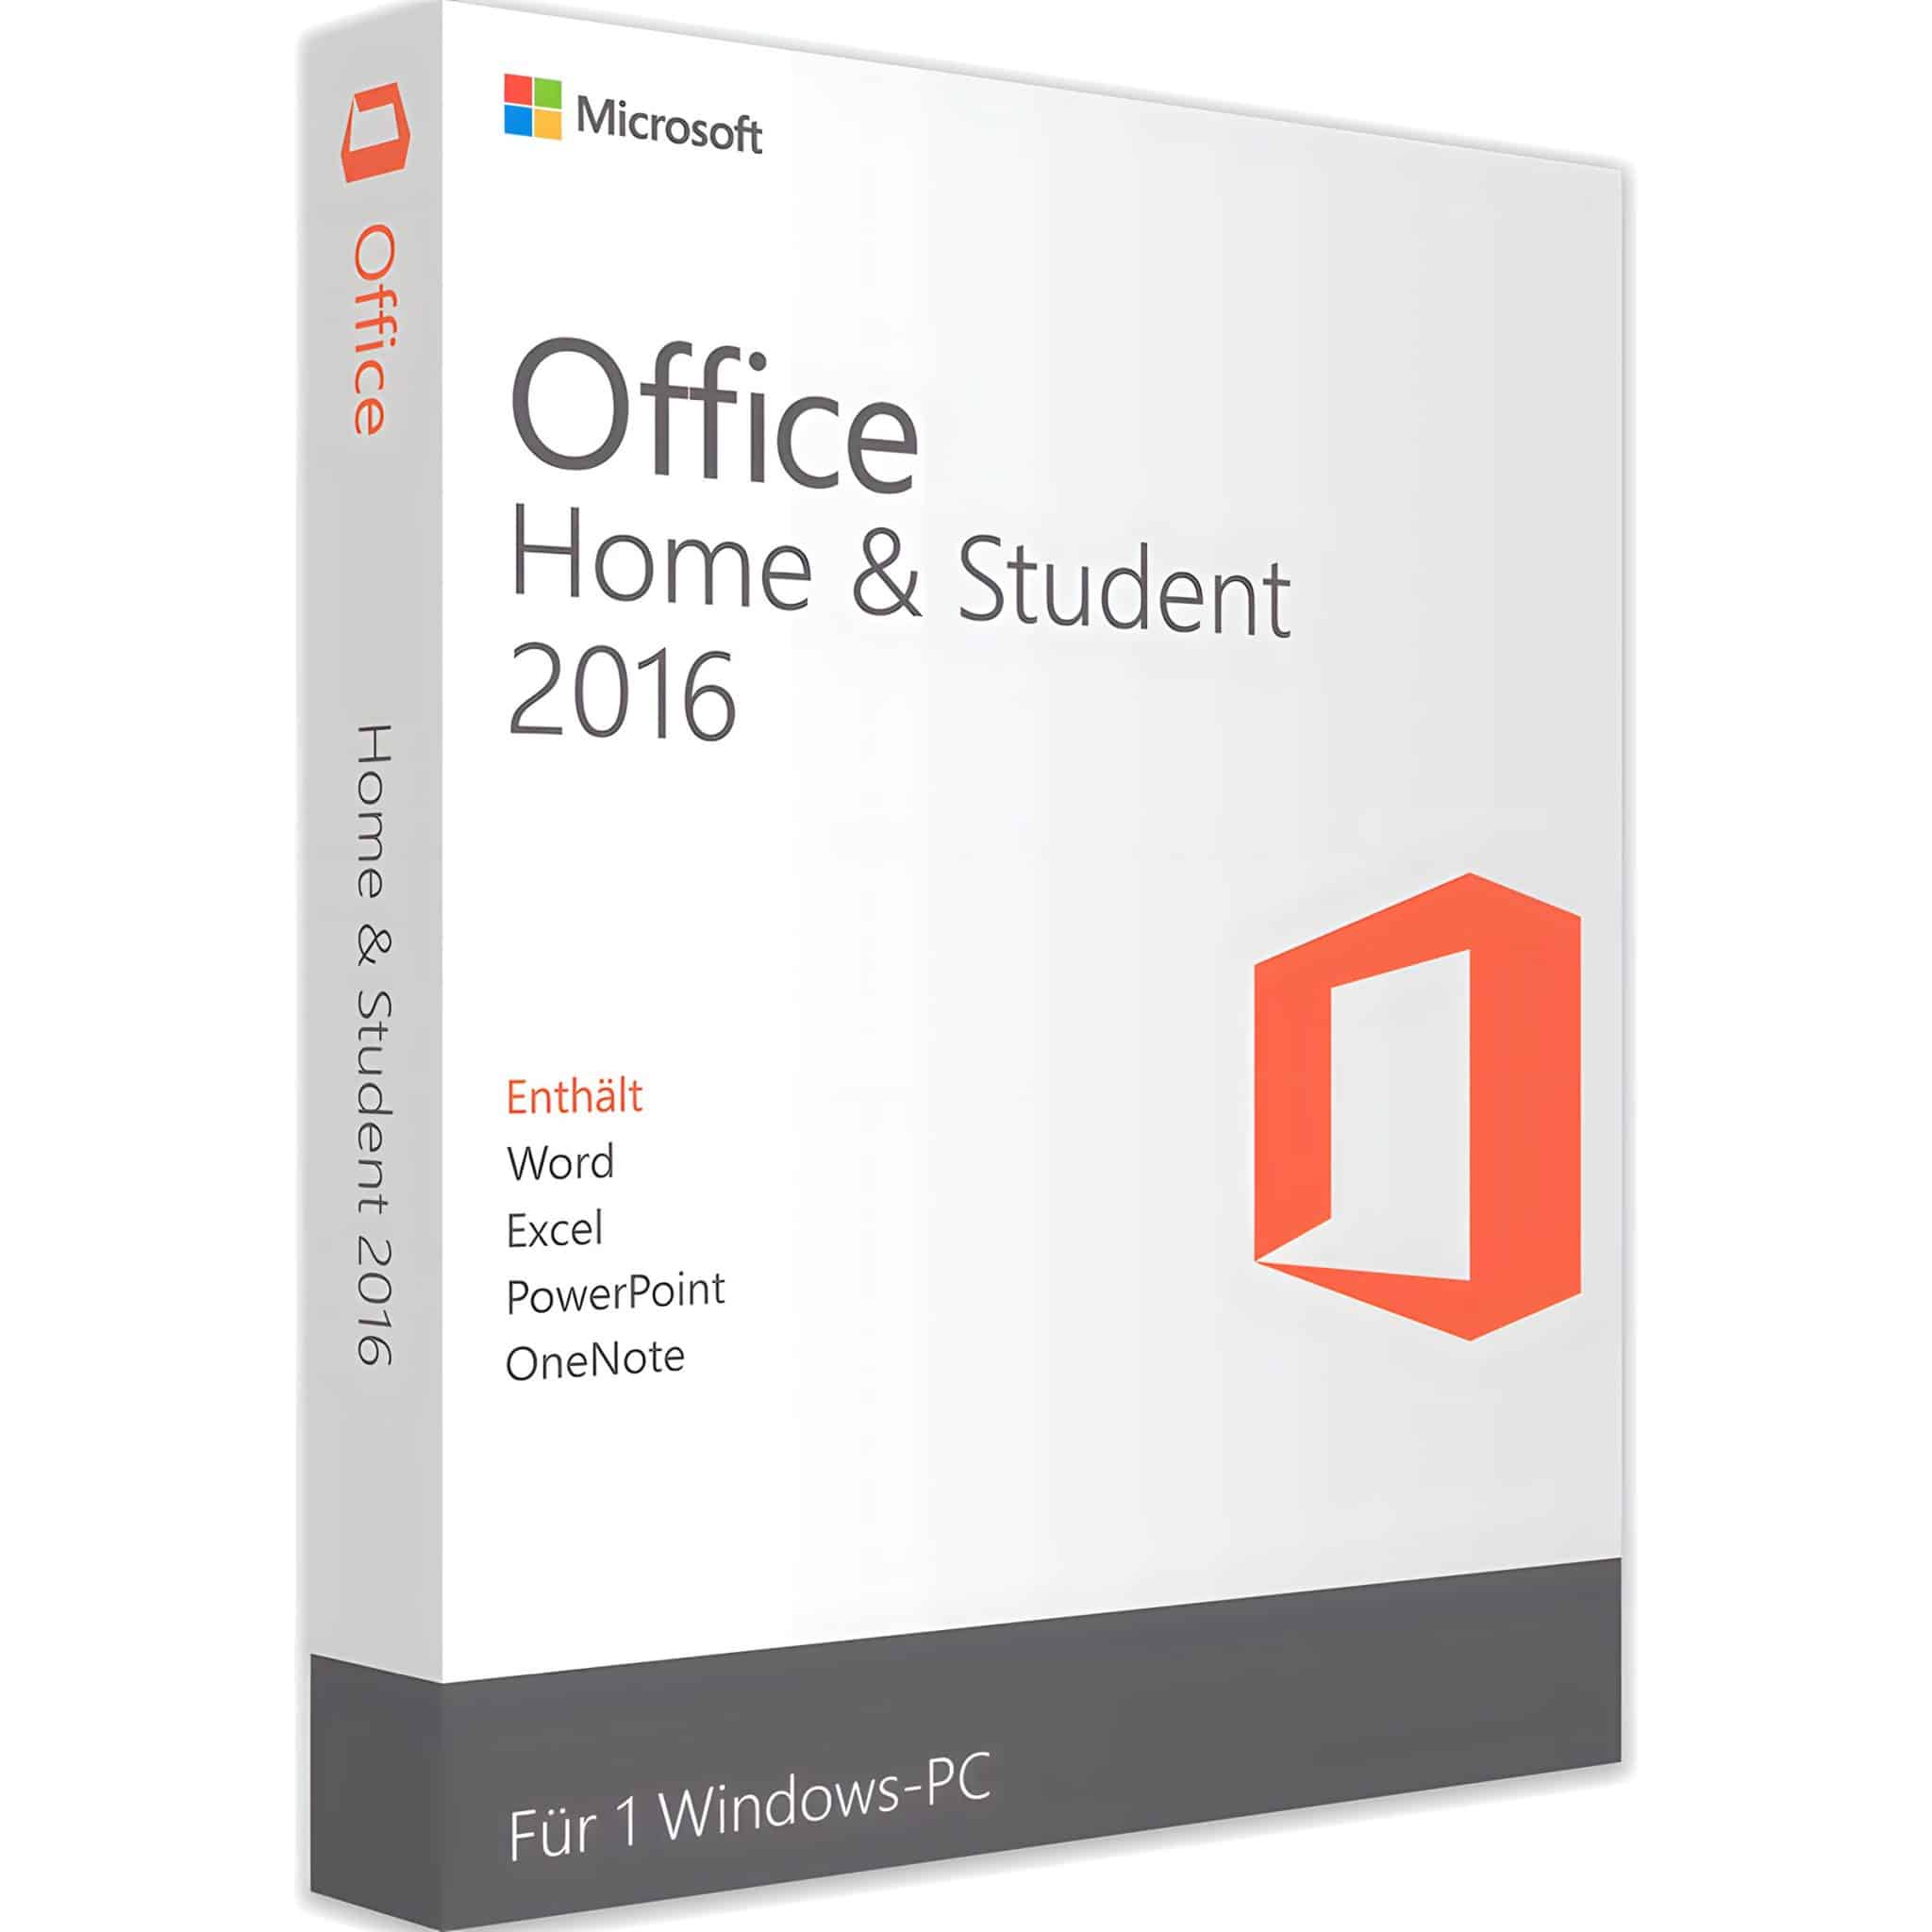 microsoft-office-home-and-student-2016-product-key